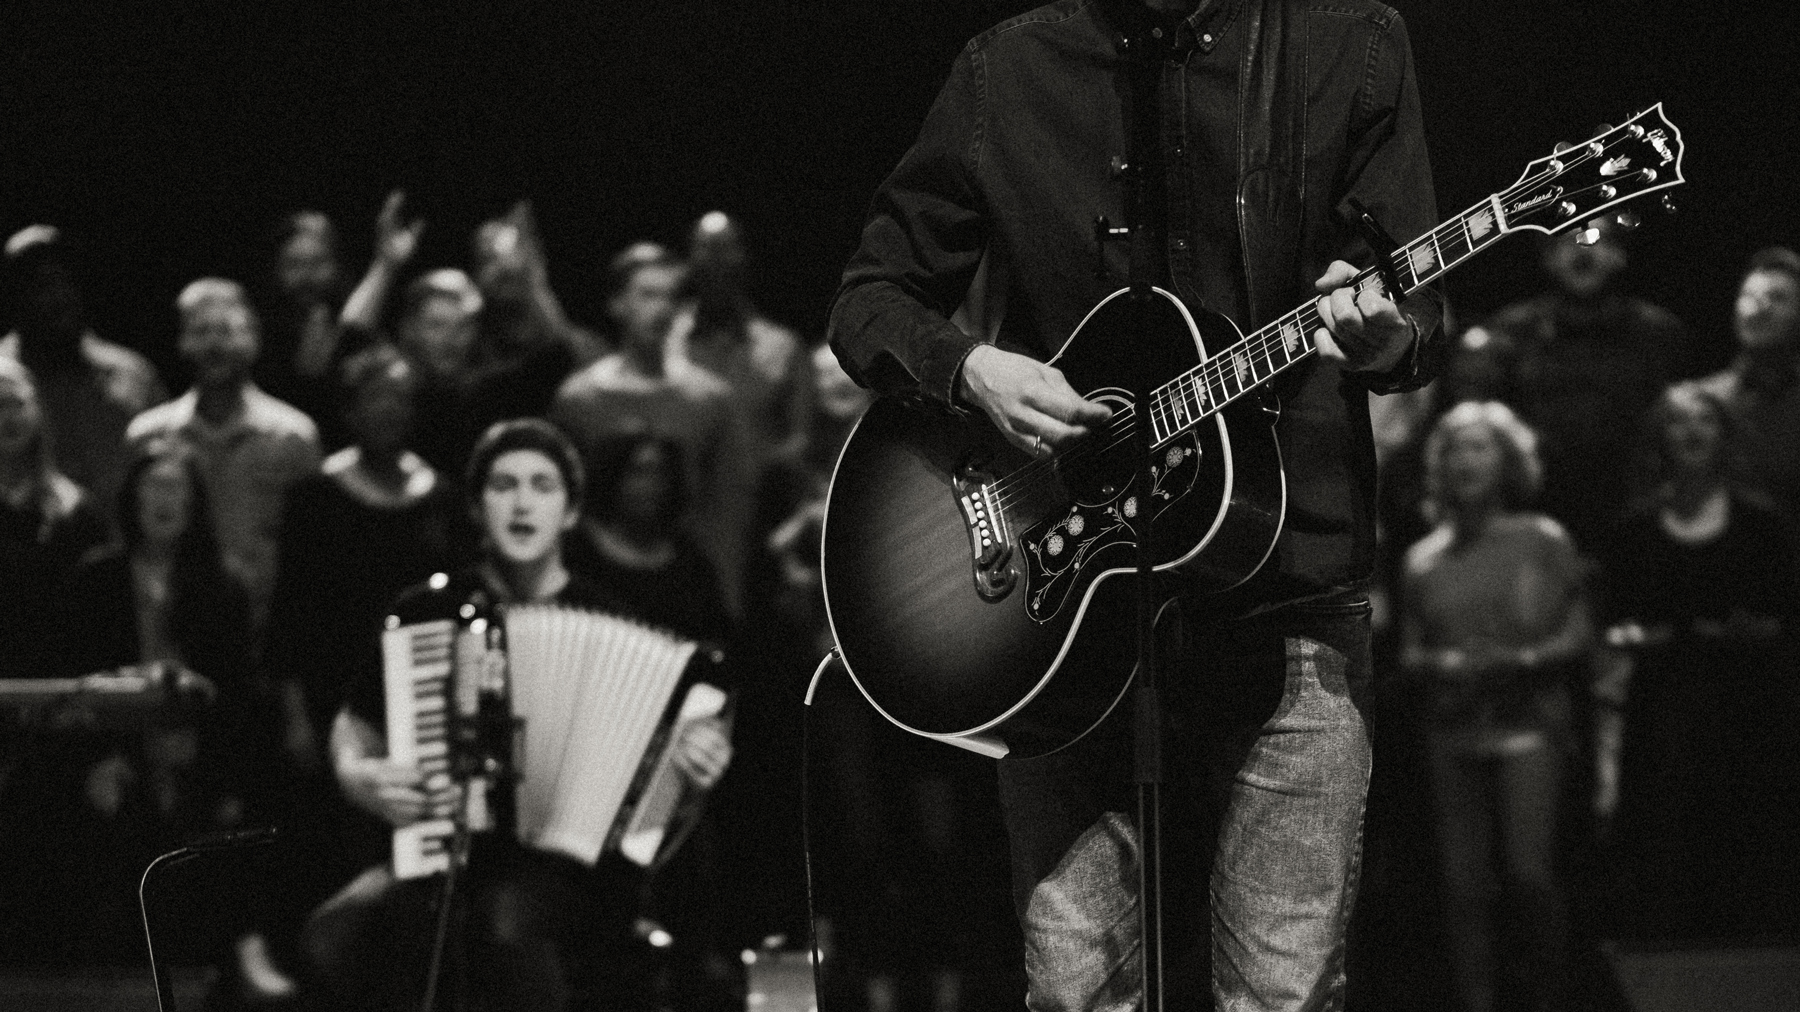 Aaron Williams' growth into becoming a worship leader